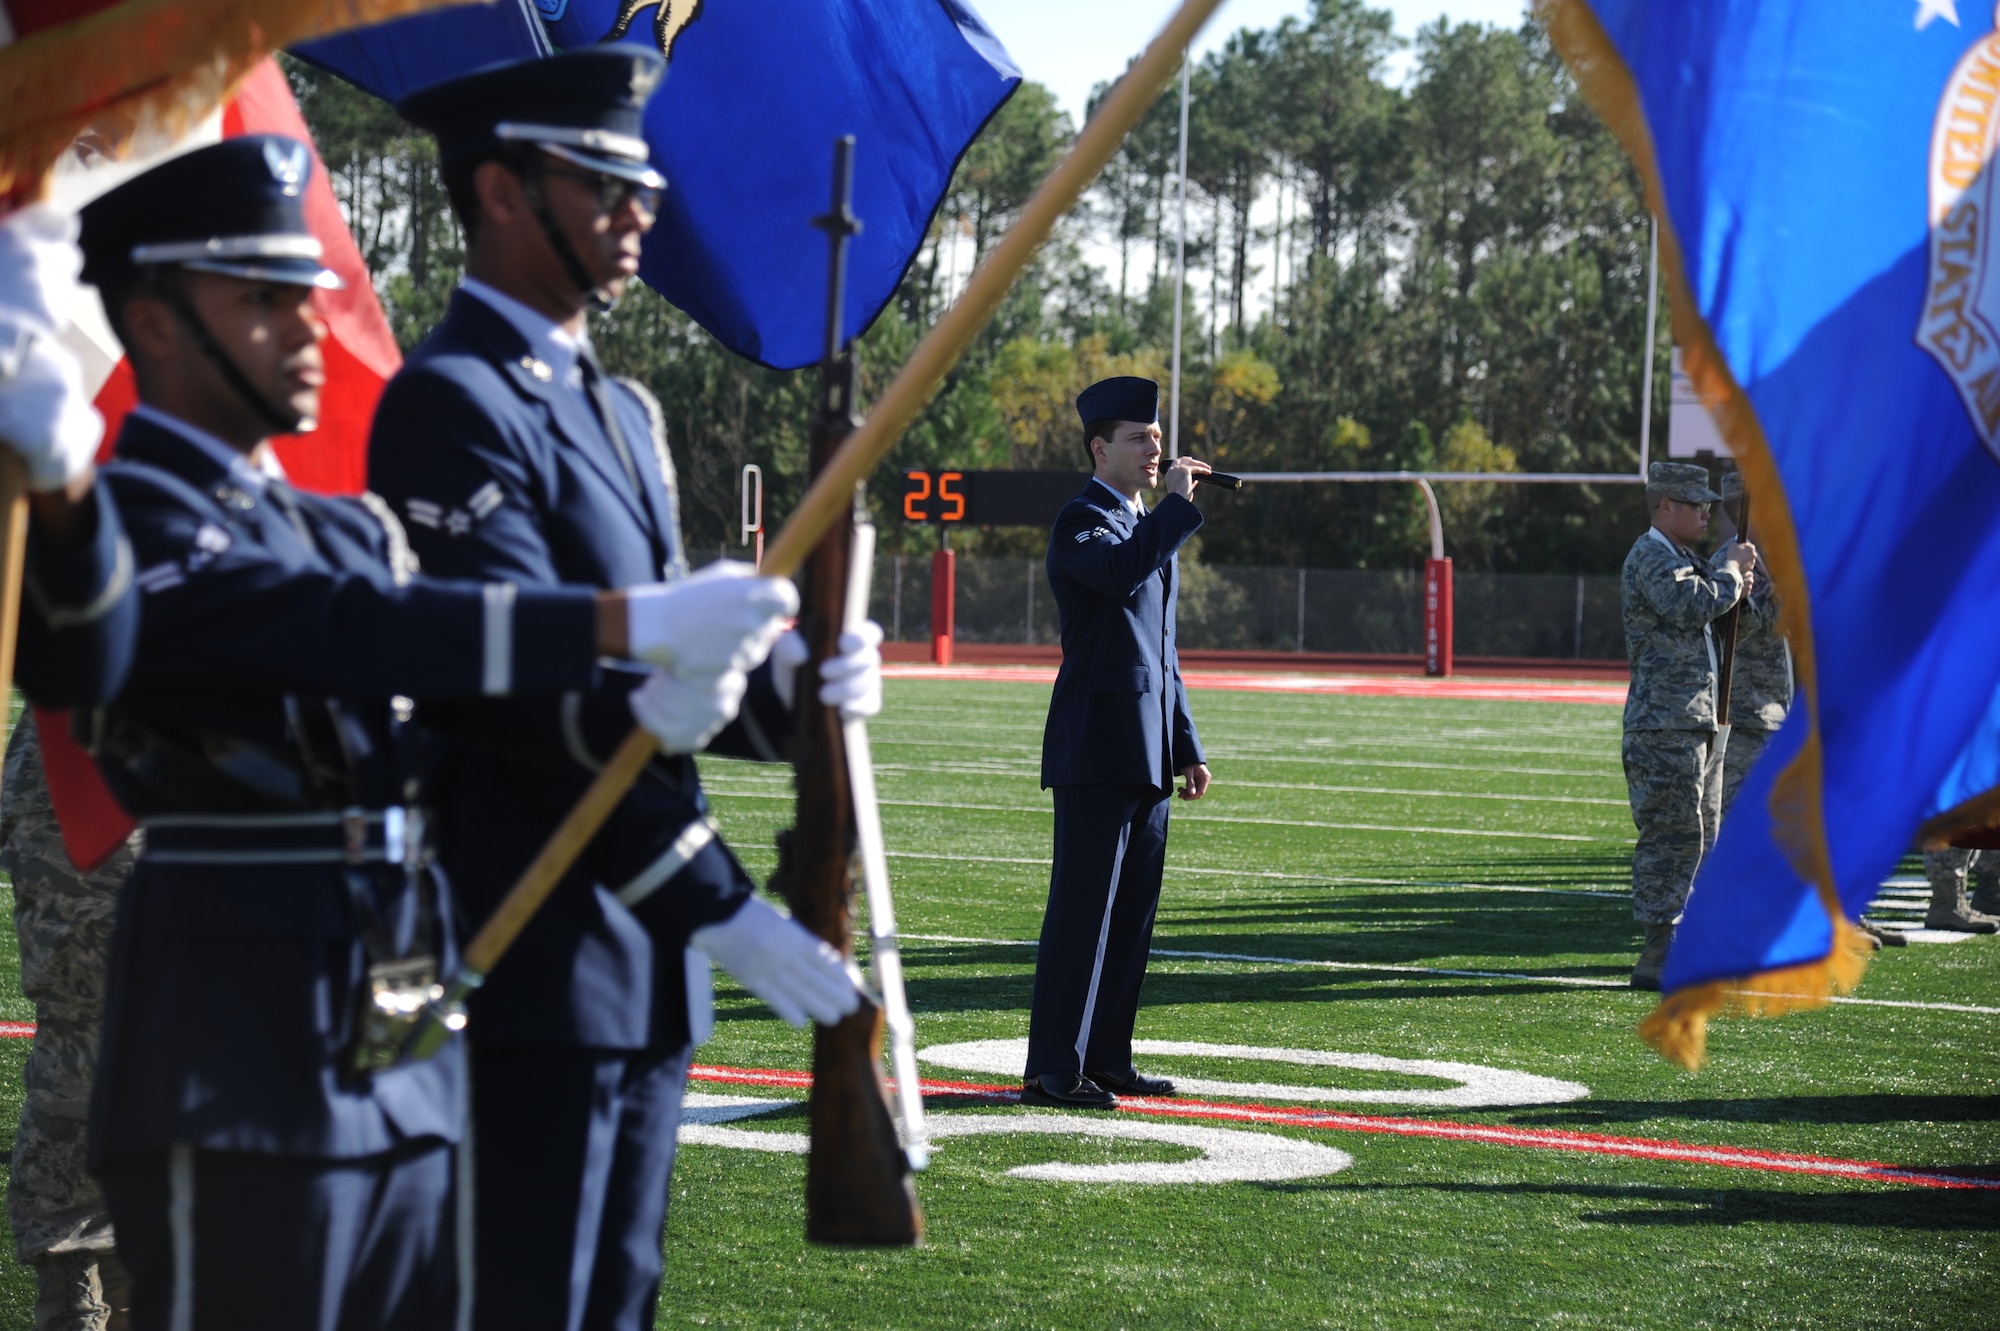 Senior Airman Robert DeSantis, 81st Medical Group aerospace medical technician, sings the National Anthem during the 2014 Mississippi Bowl Dec. 7, 2014, at the Biloxi High School Football Stadium. Brig. Gen. Patrick Higby, 81st Training Wing commander, the Keesler Honor Guard and Airmen carrying the 50-State flags also participated in the pre-game celebration. (U.S. Air Force photo by Kemberly Groue)